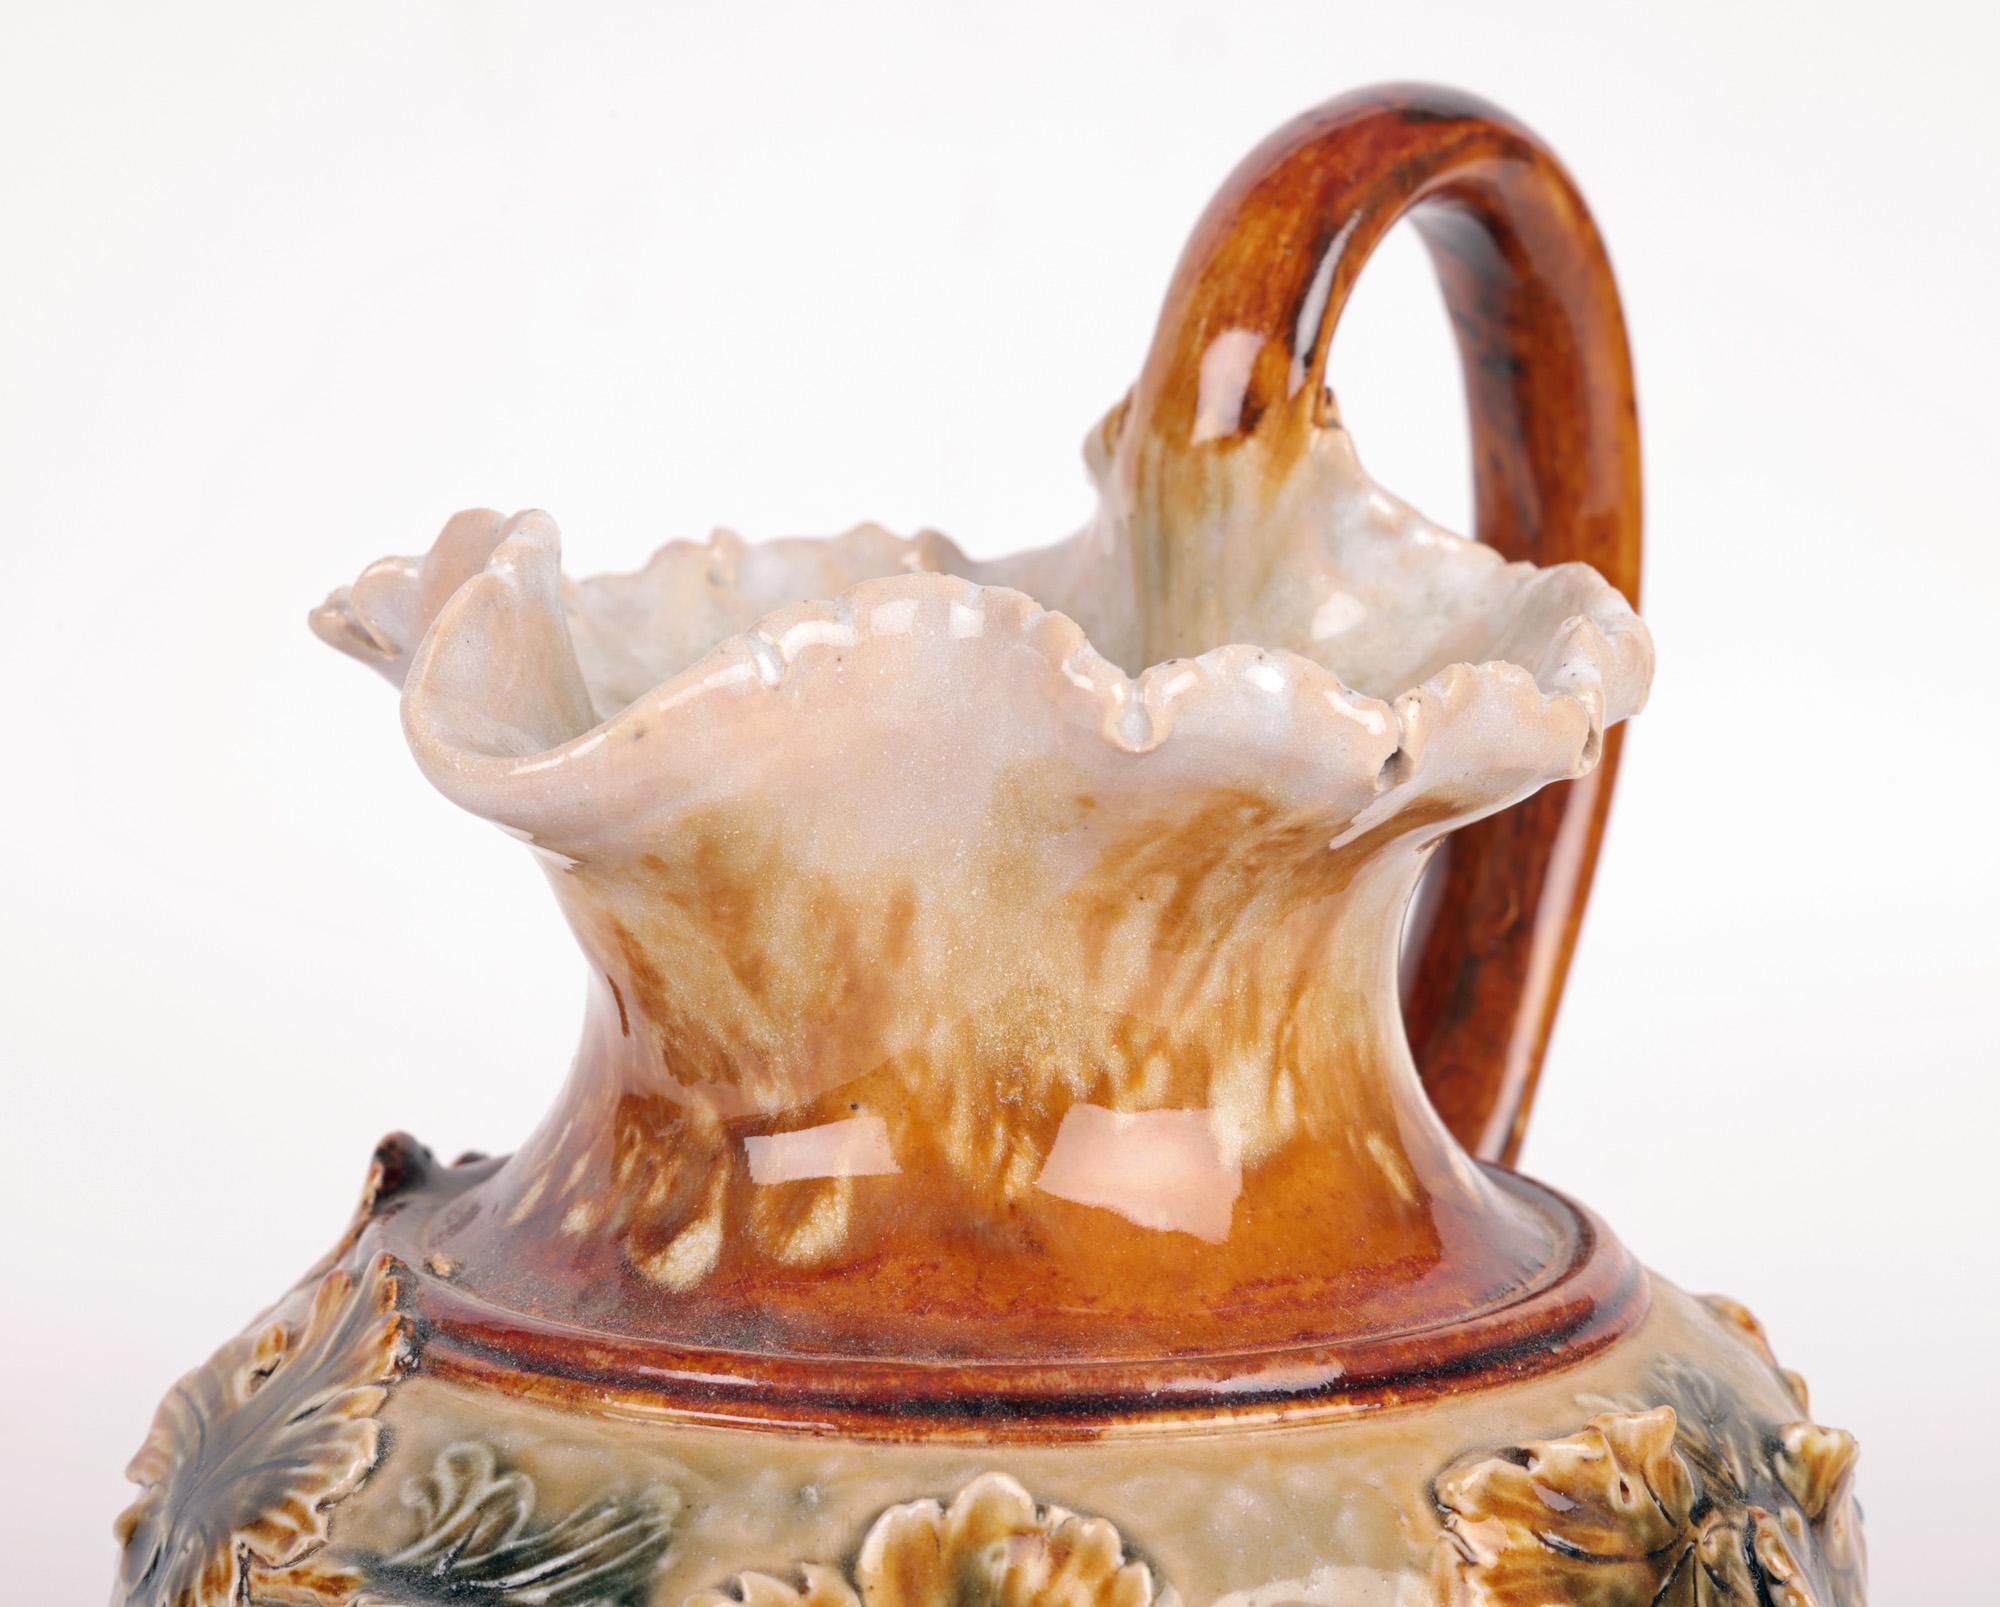 A rare and unusual Doulton Lambeth Art Pottery jug carved and decorated in relief with trailing fruiting vines by renowned and gifted modeler, designer and decorator Mark V Marshall and believed to date from around 1880. This unique jug stands on a